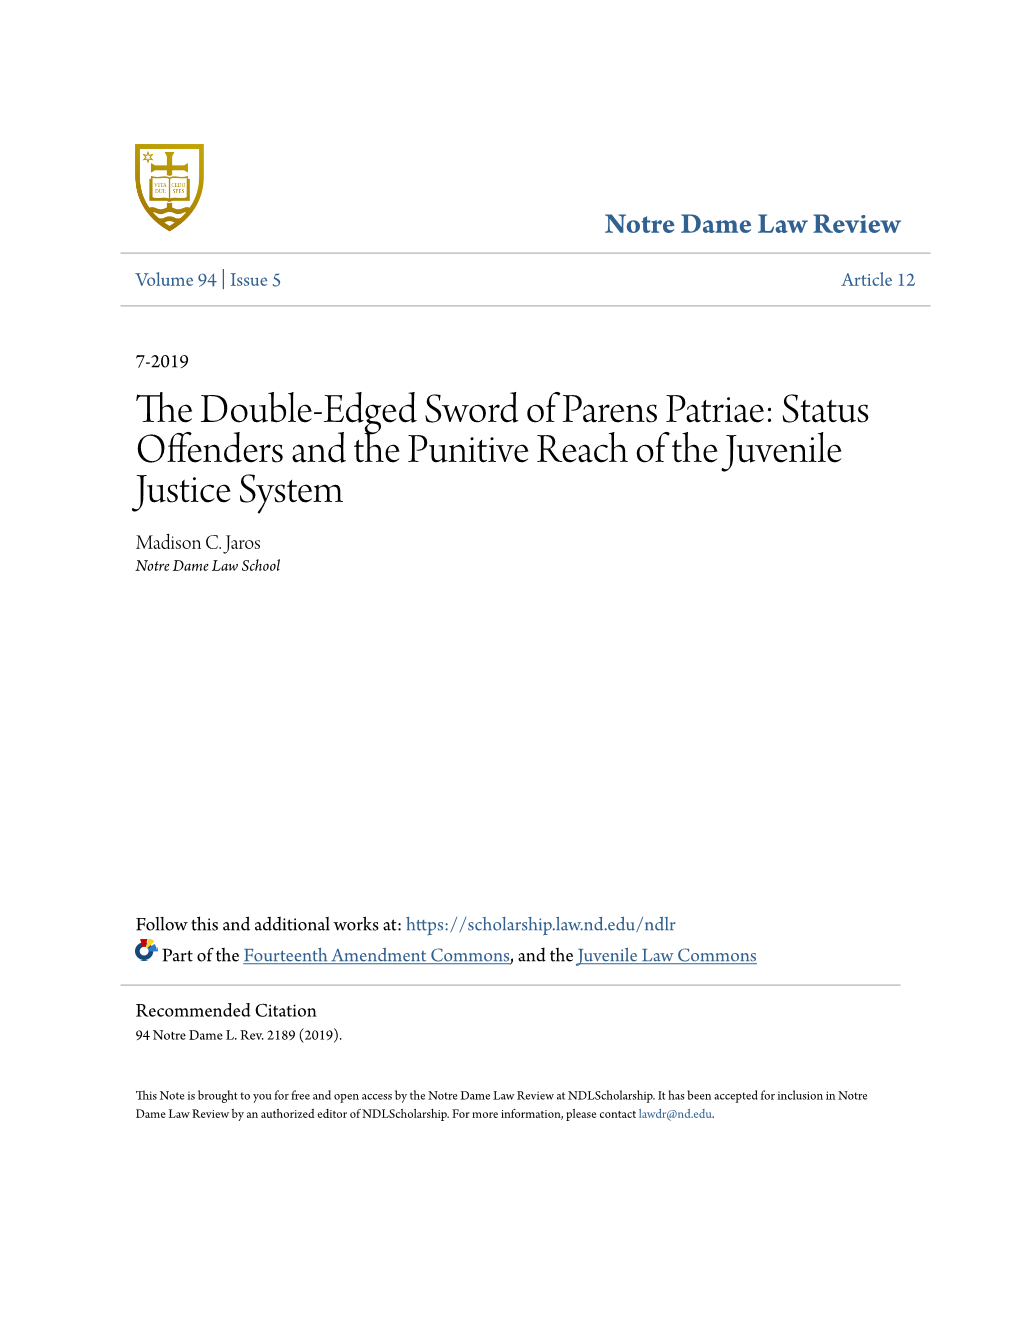 The Double-Edged Sword of Parens Patriae: Status Offenders and the Punitive Reach of the Juvenile Justice System